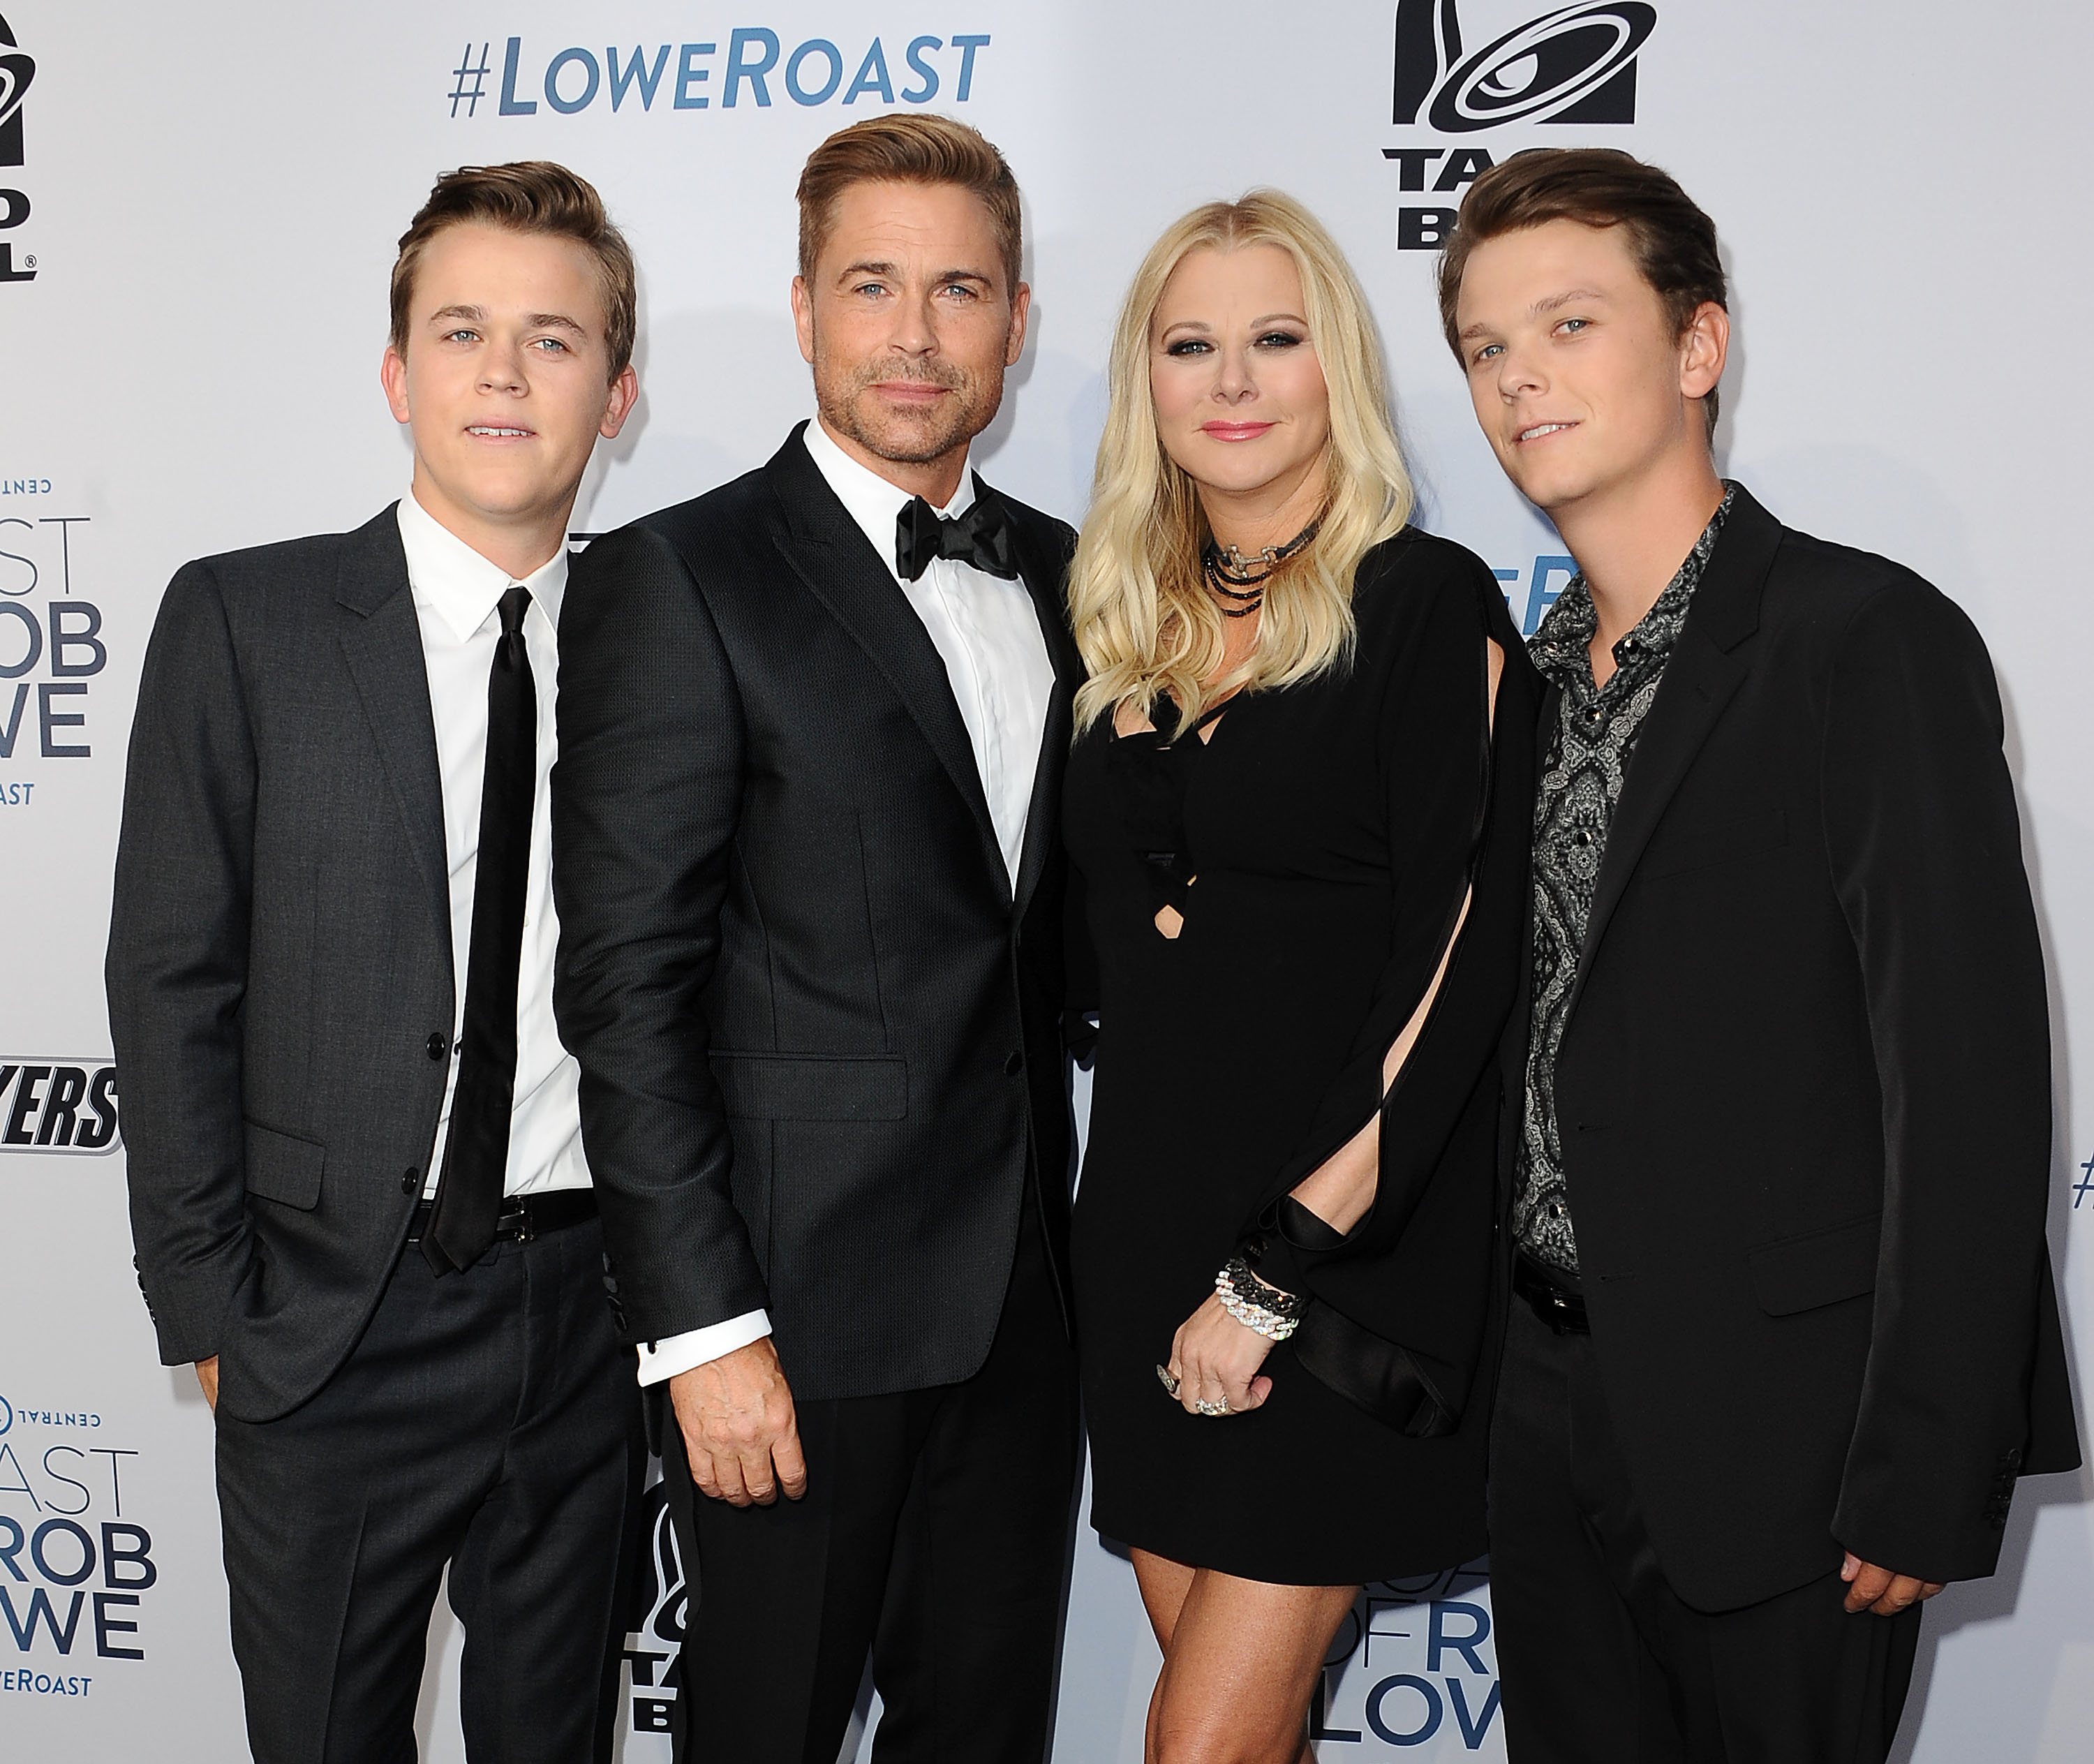 John Owen Lowe, Rob Lowe, Sheryl Berkoff, and Matthew Edward Lowe pose for photos at the Comedy Central Roast of Rob Lowe at Sony Studios on August 27, 2016 in Los Angeles, California.